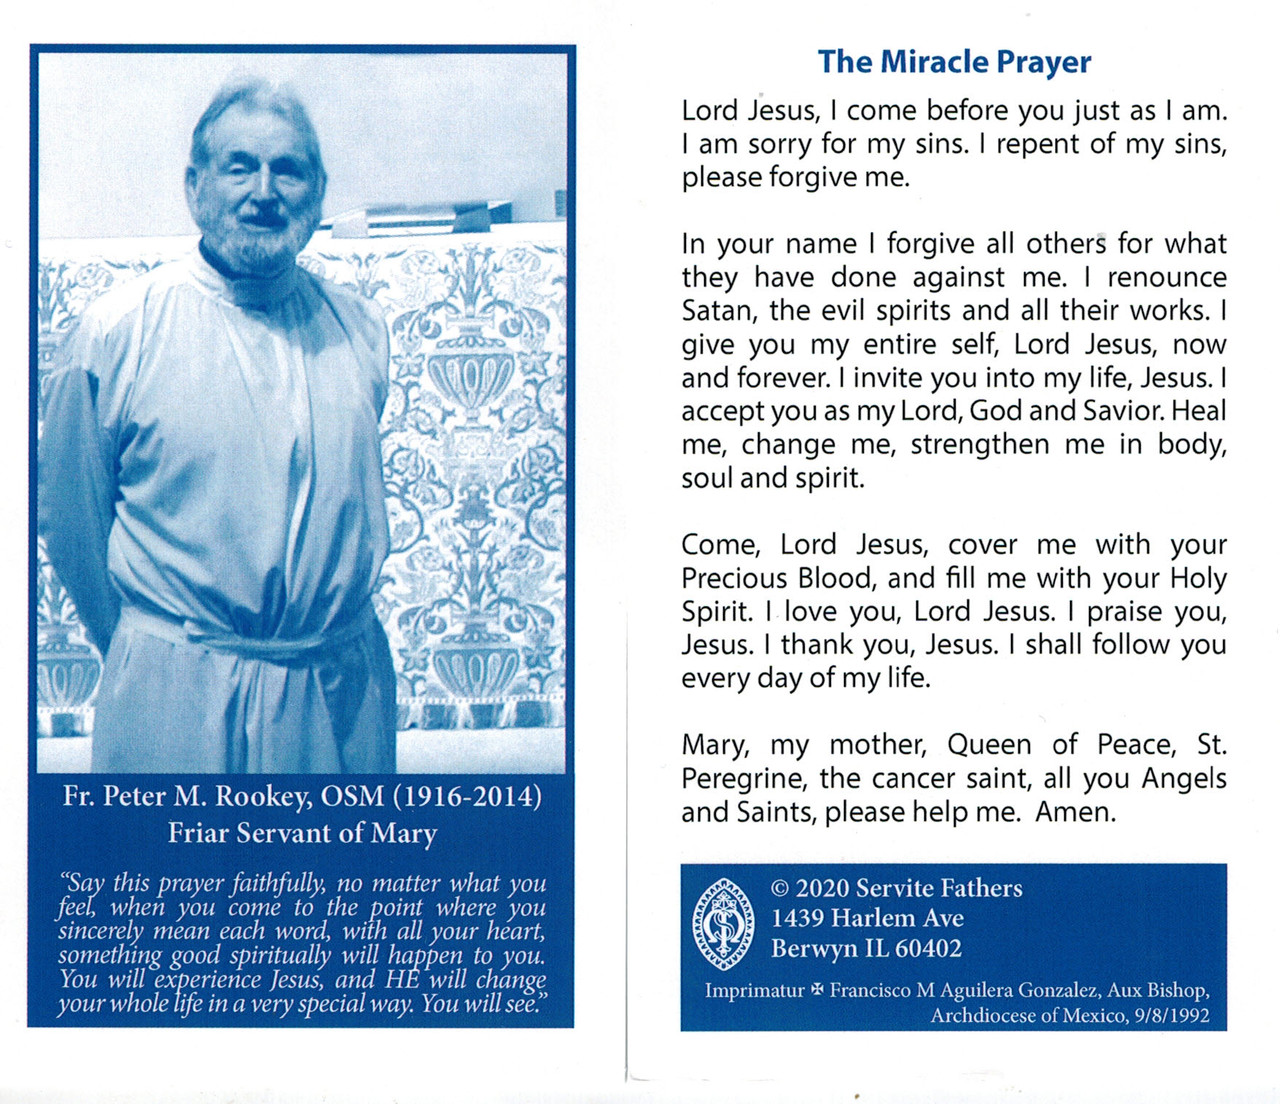 The Miracle Prayer by Fr. Rookey